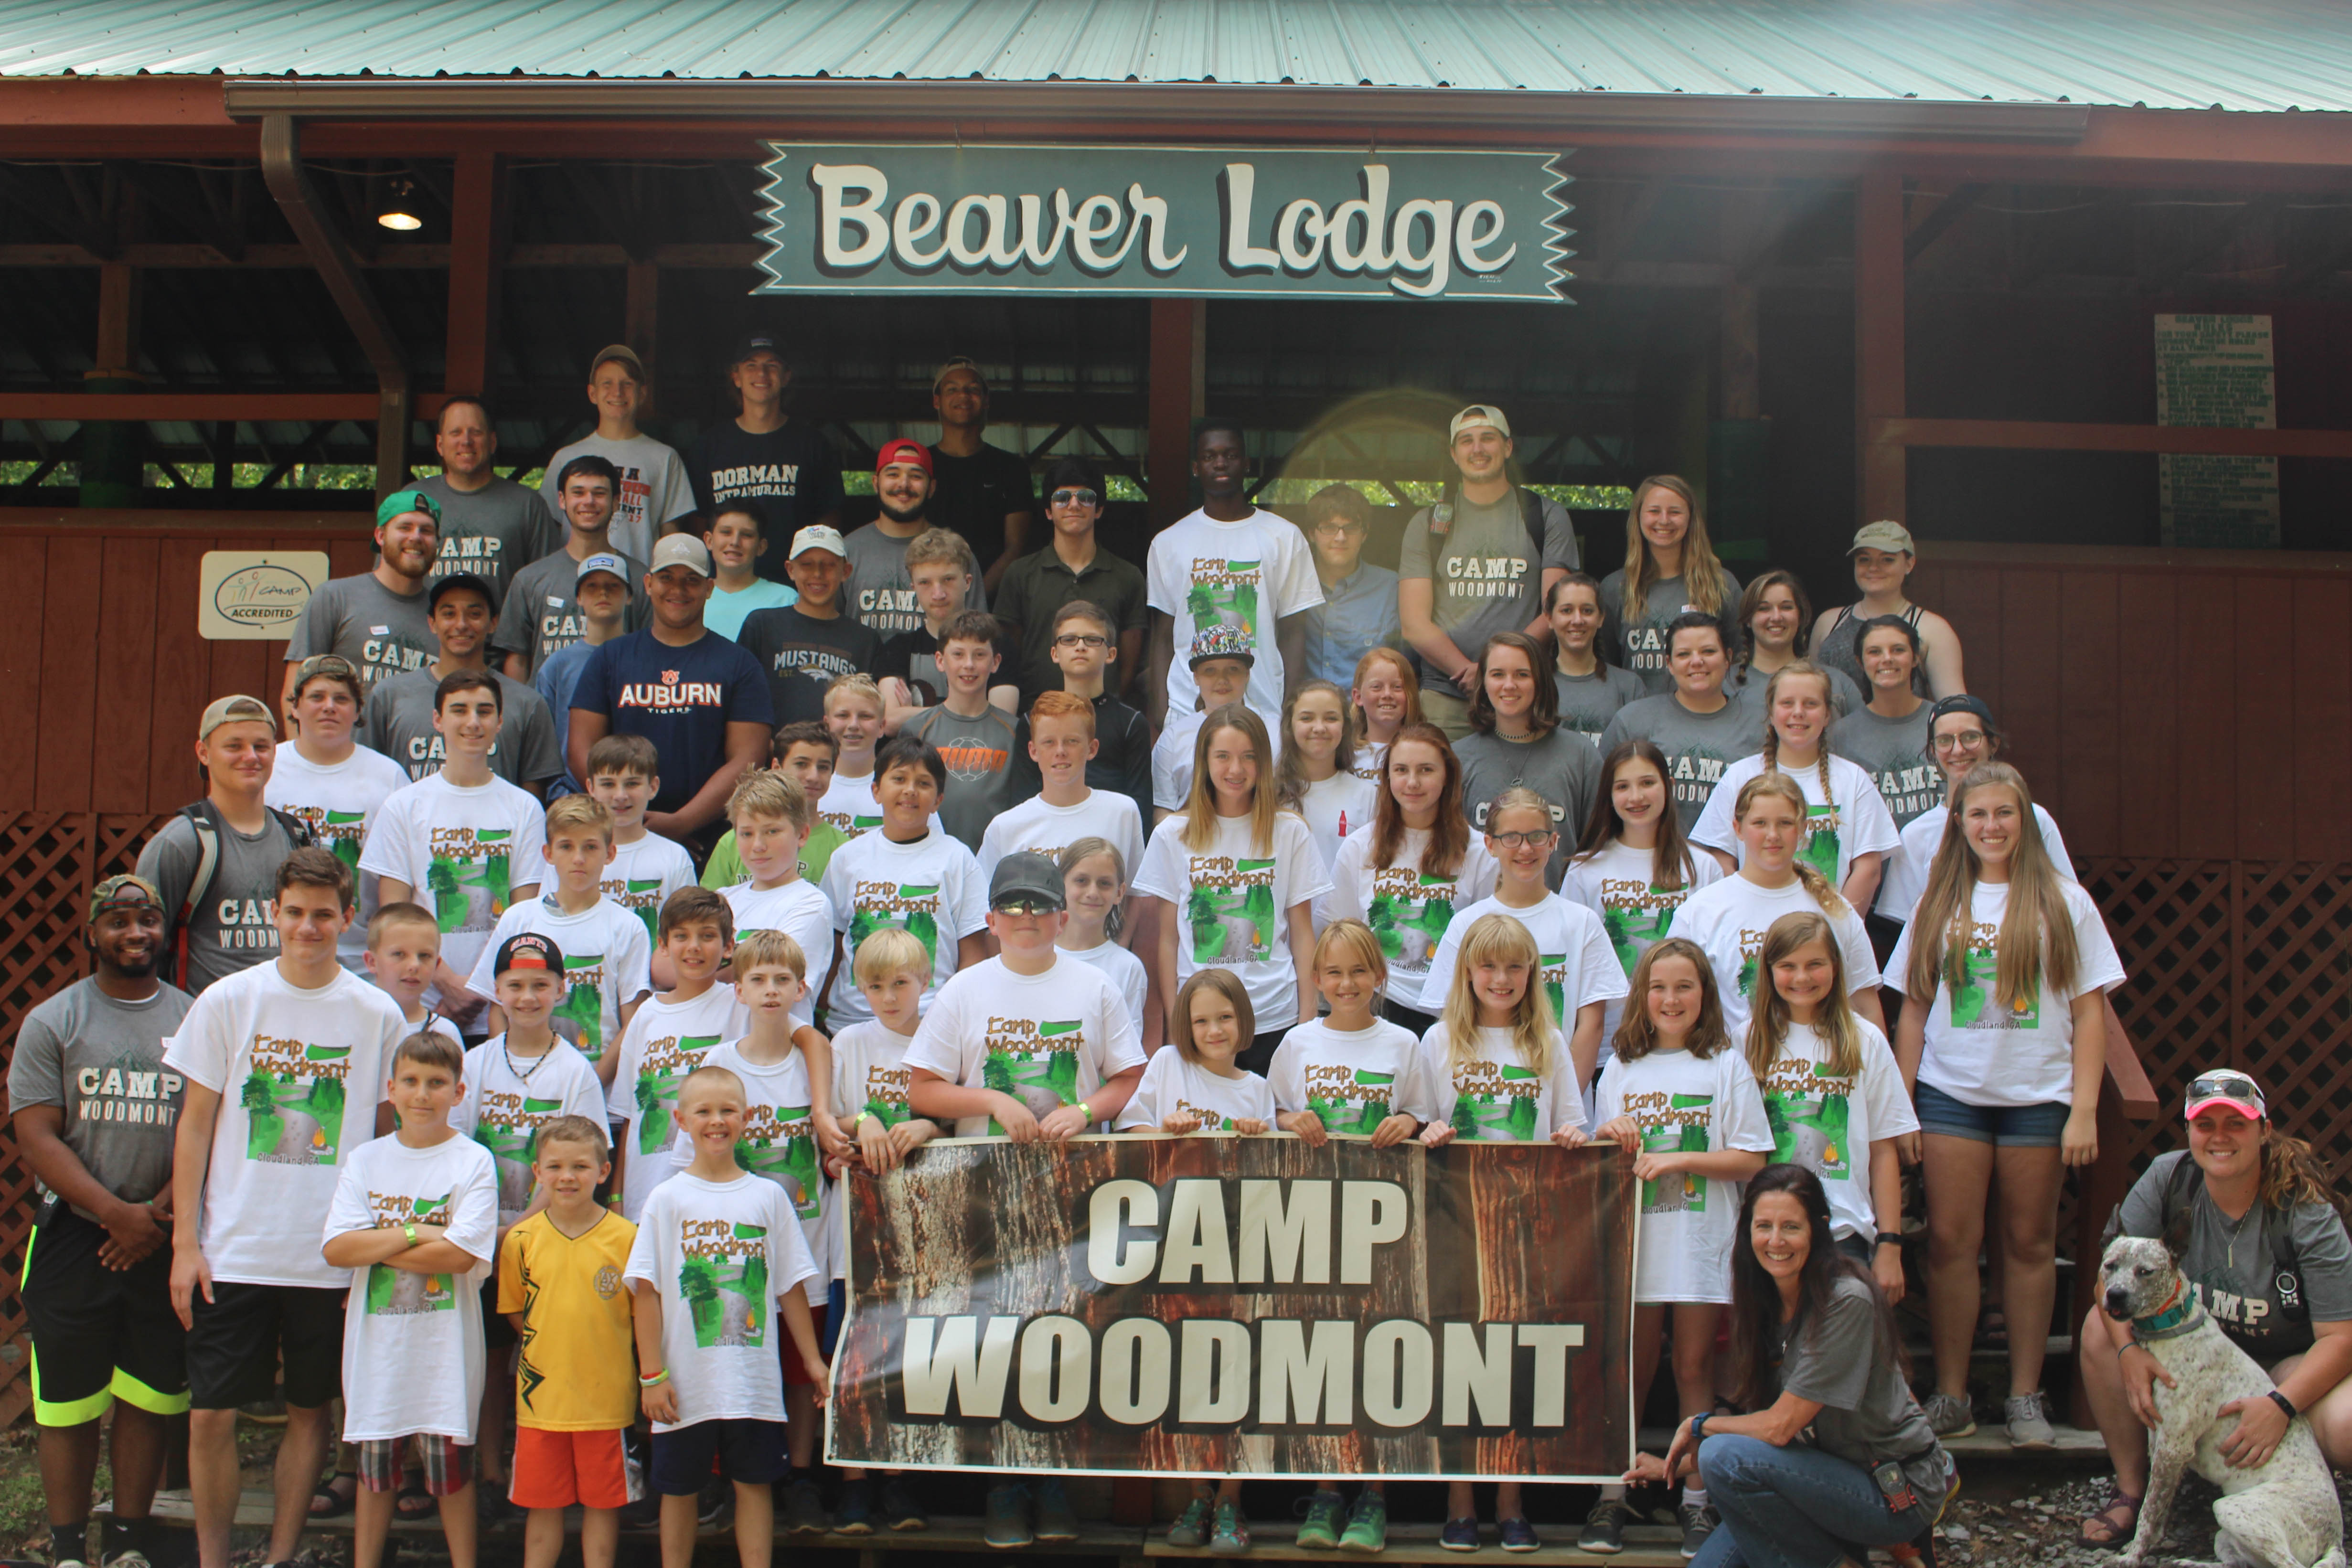 Welcome to Camp Woodmont, an overnight summer camp